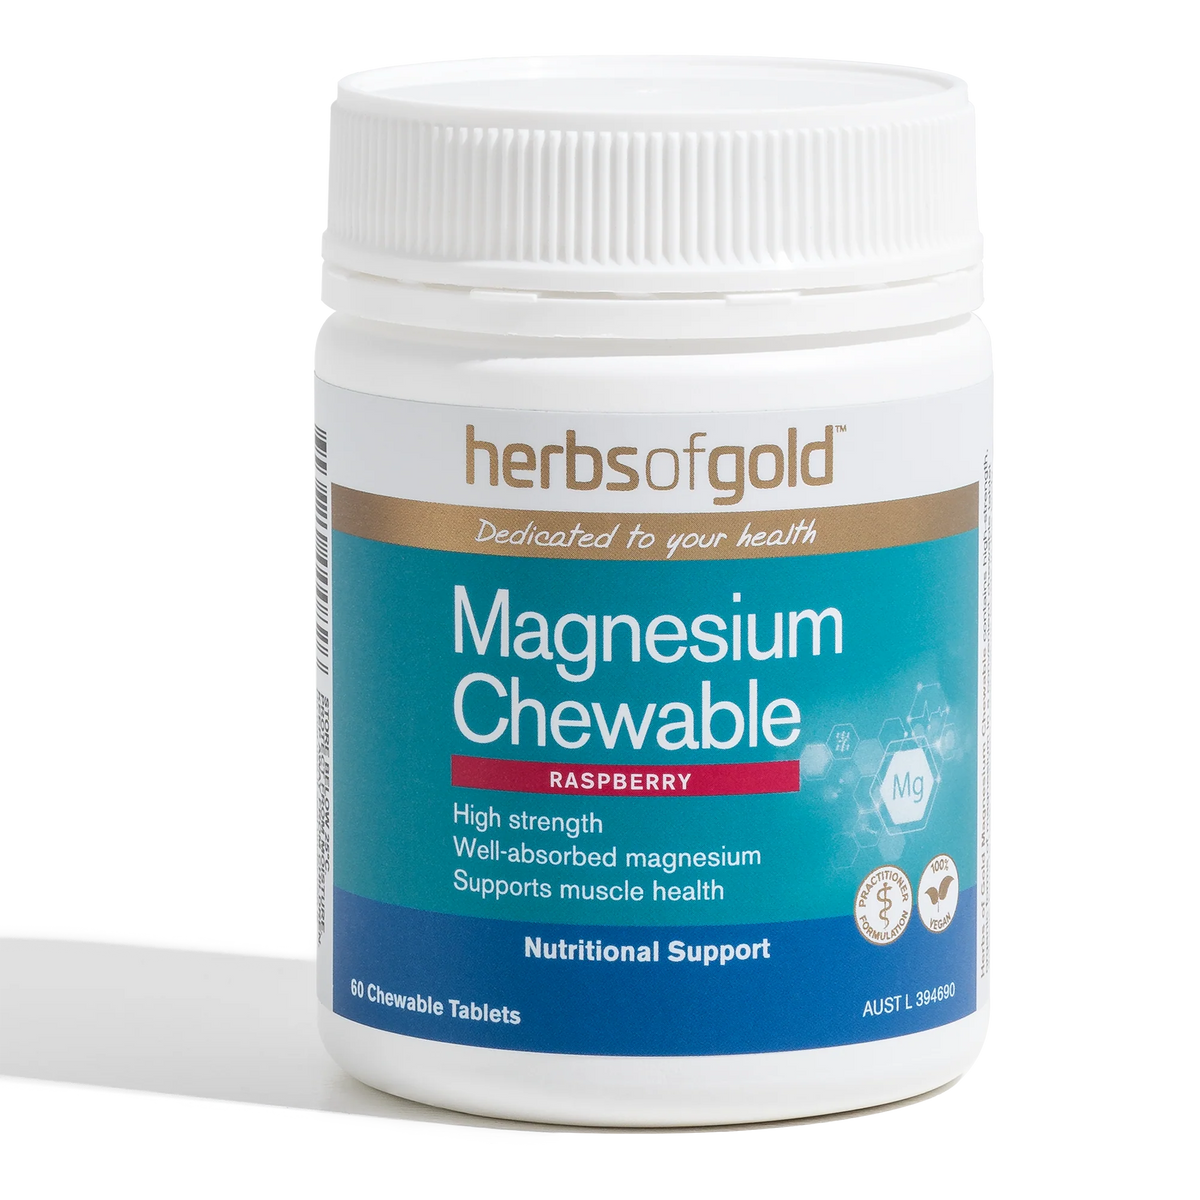 Magnesium Chewable // Supports Muscle Health (Raspberry)